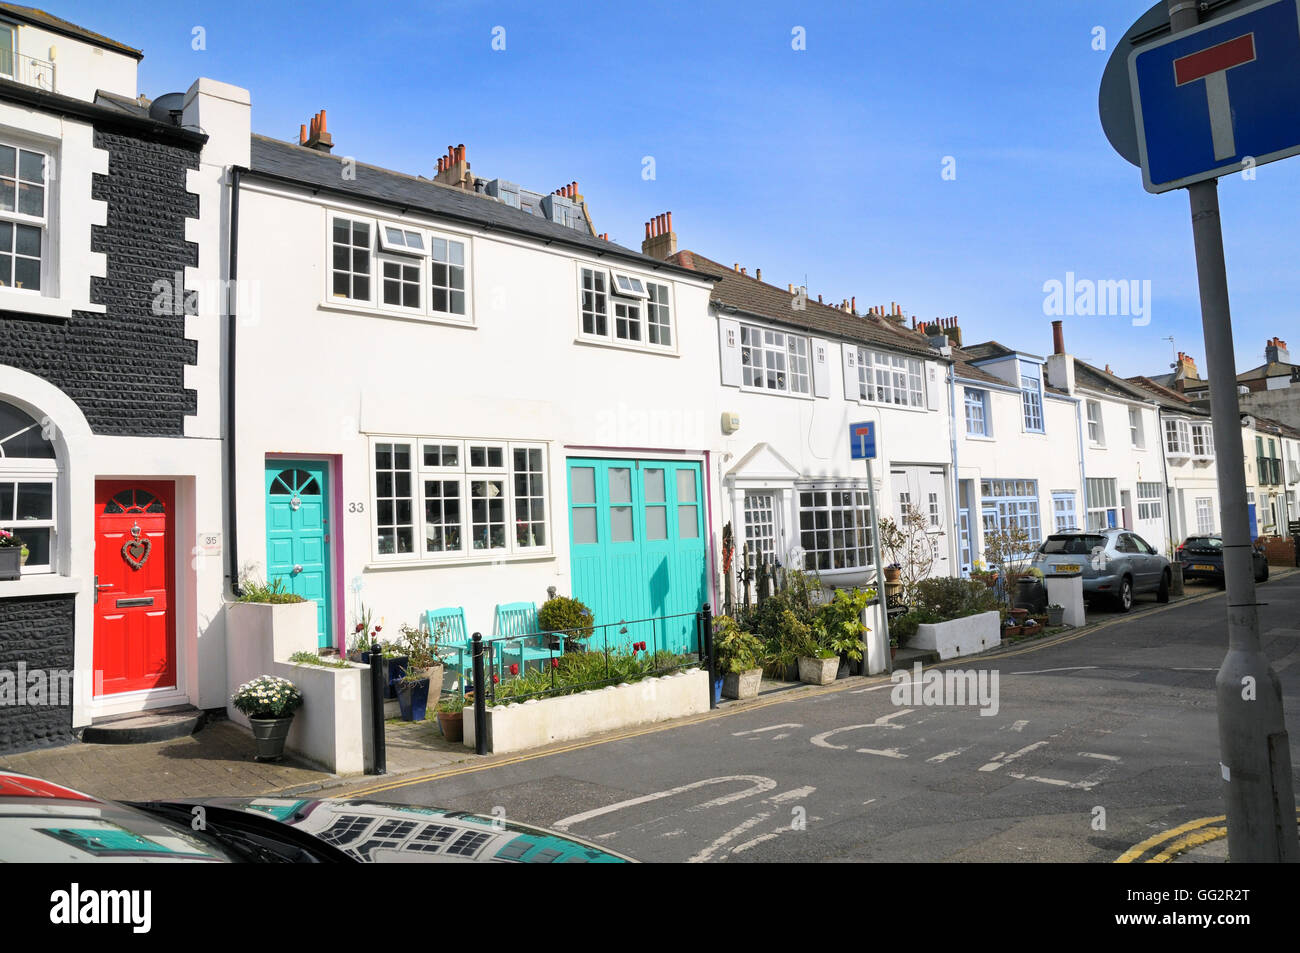 Dudley Mews, Brunswick Street West, Hove, Brighton & Hove, East Sussex, England, UK Stock Photo